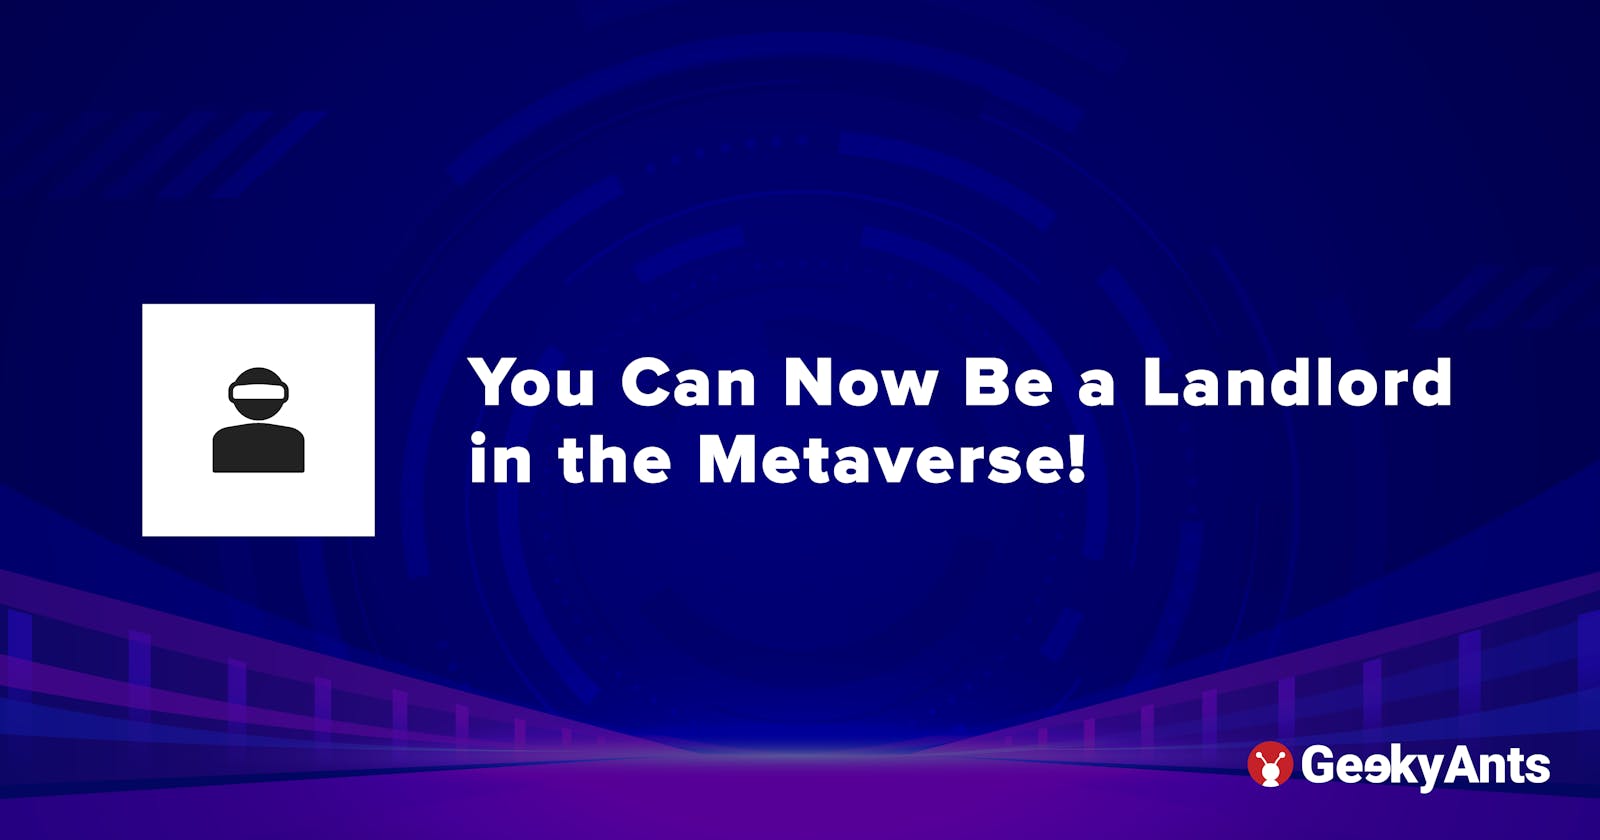 You Can Now Be a Landlord in the Metaverse!